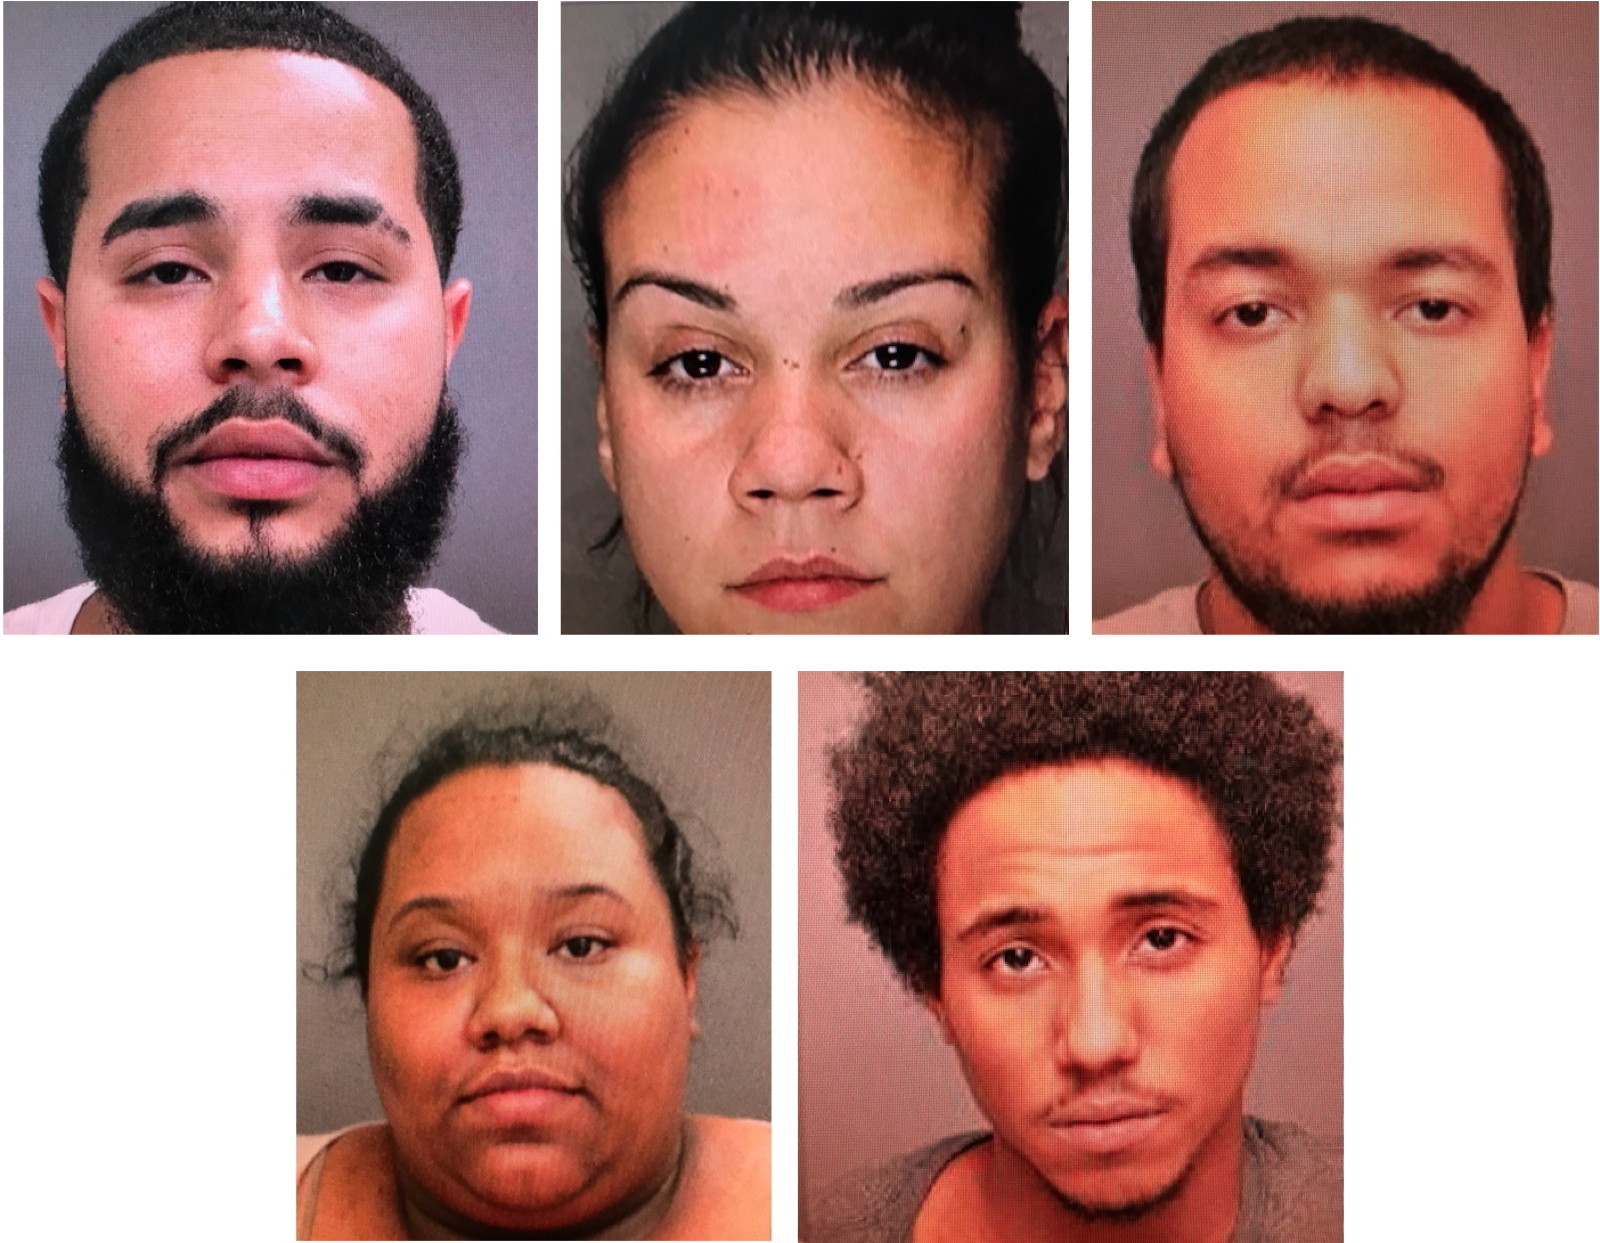 Member of the alleged Michael Persaud drug trafficking organization recently arrested included (clockwise from top left) Jordan Vinas, Tiffany Irizarry, Joseph Urena, Joseph Veras and Anne Persaud.